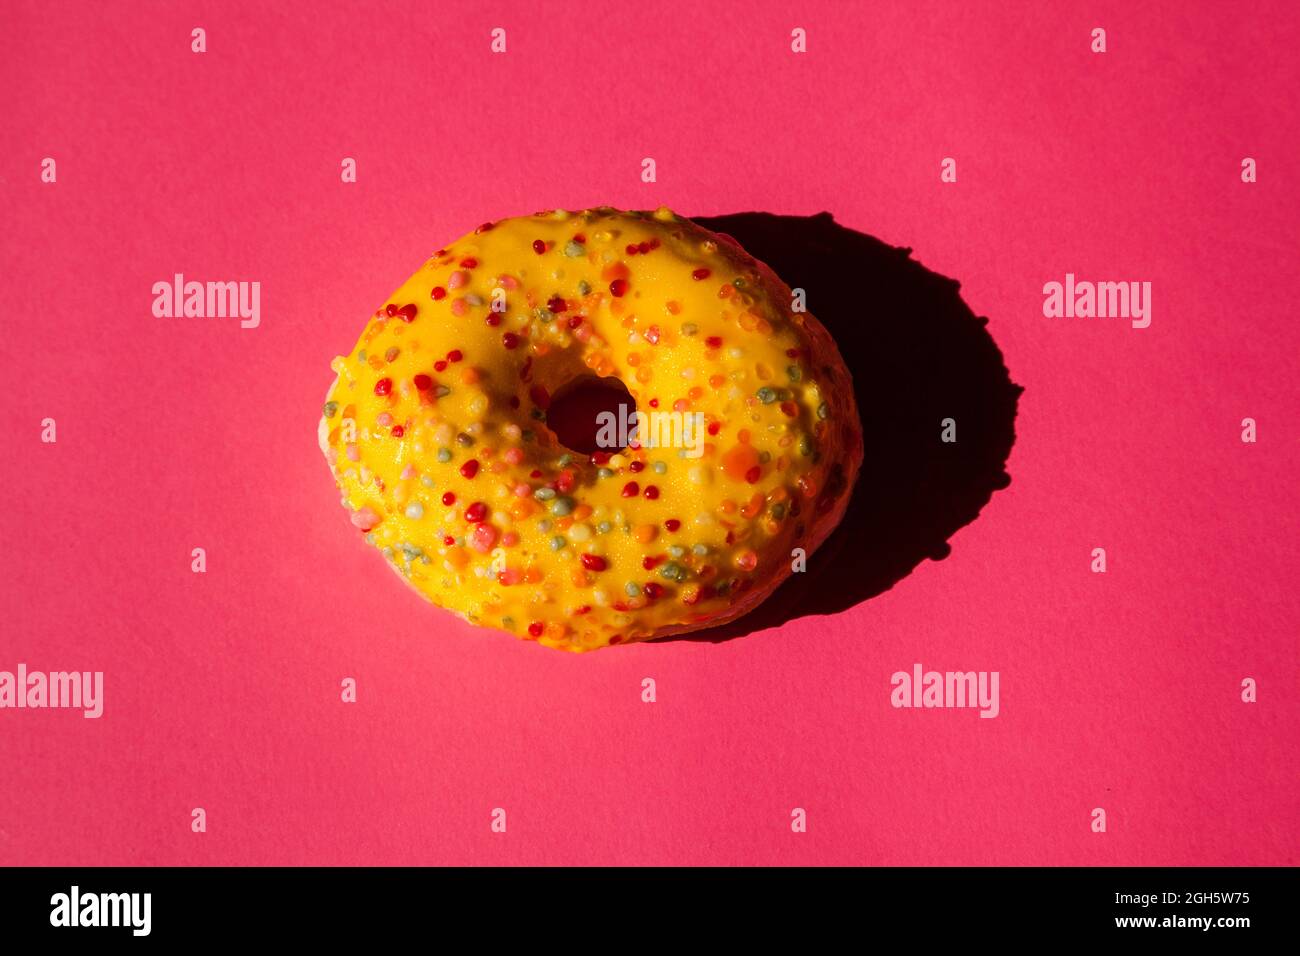 Top view of one donuts coated with a yellow sugar with colored balls on pink background Stock Photo